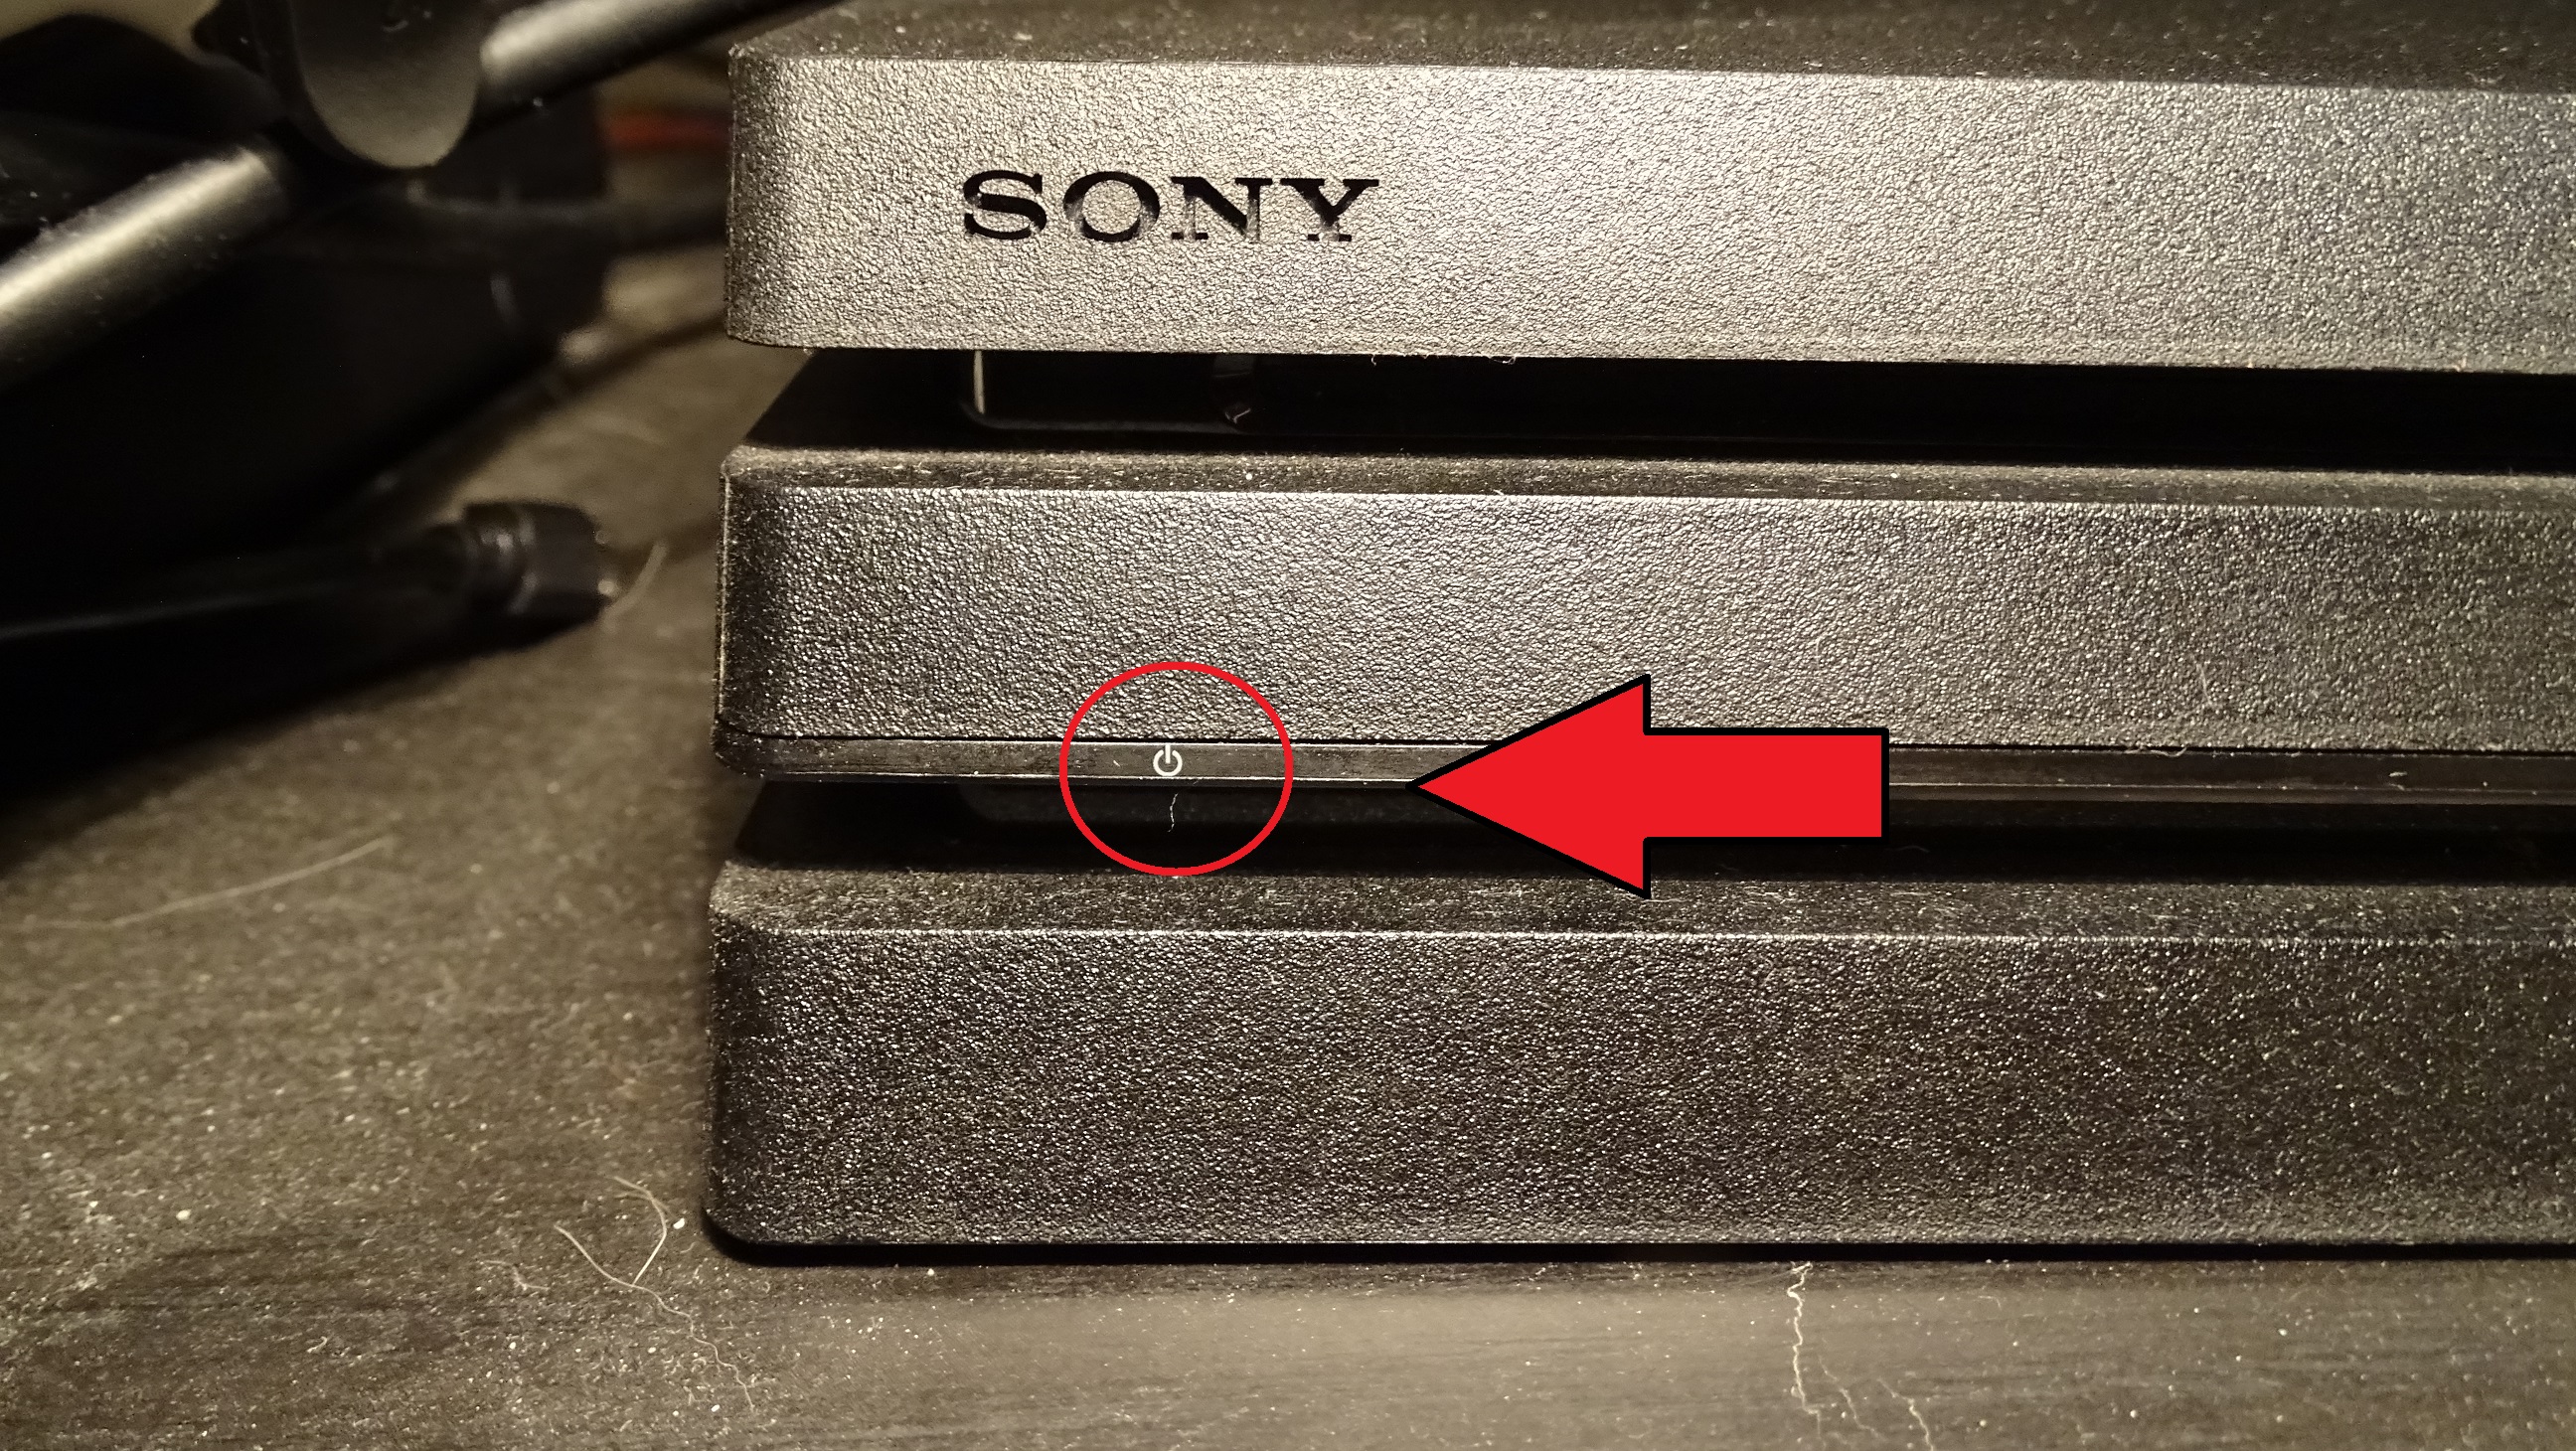 ps4 pro on button